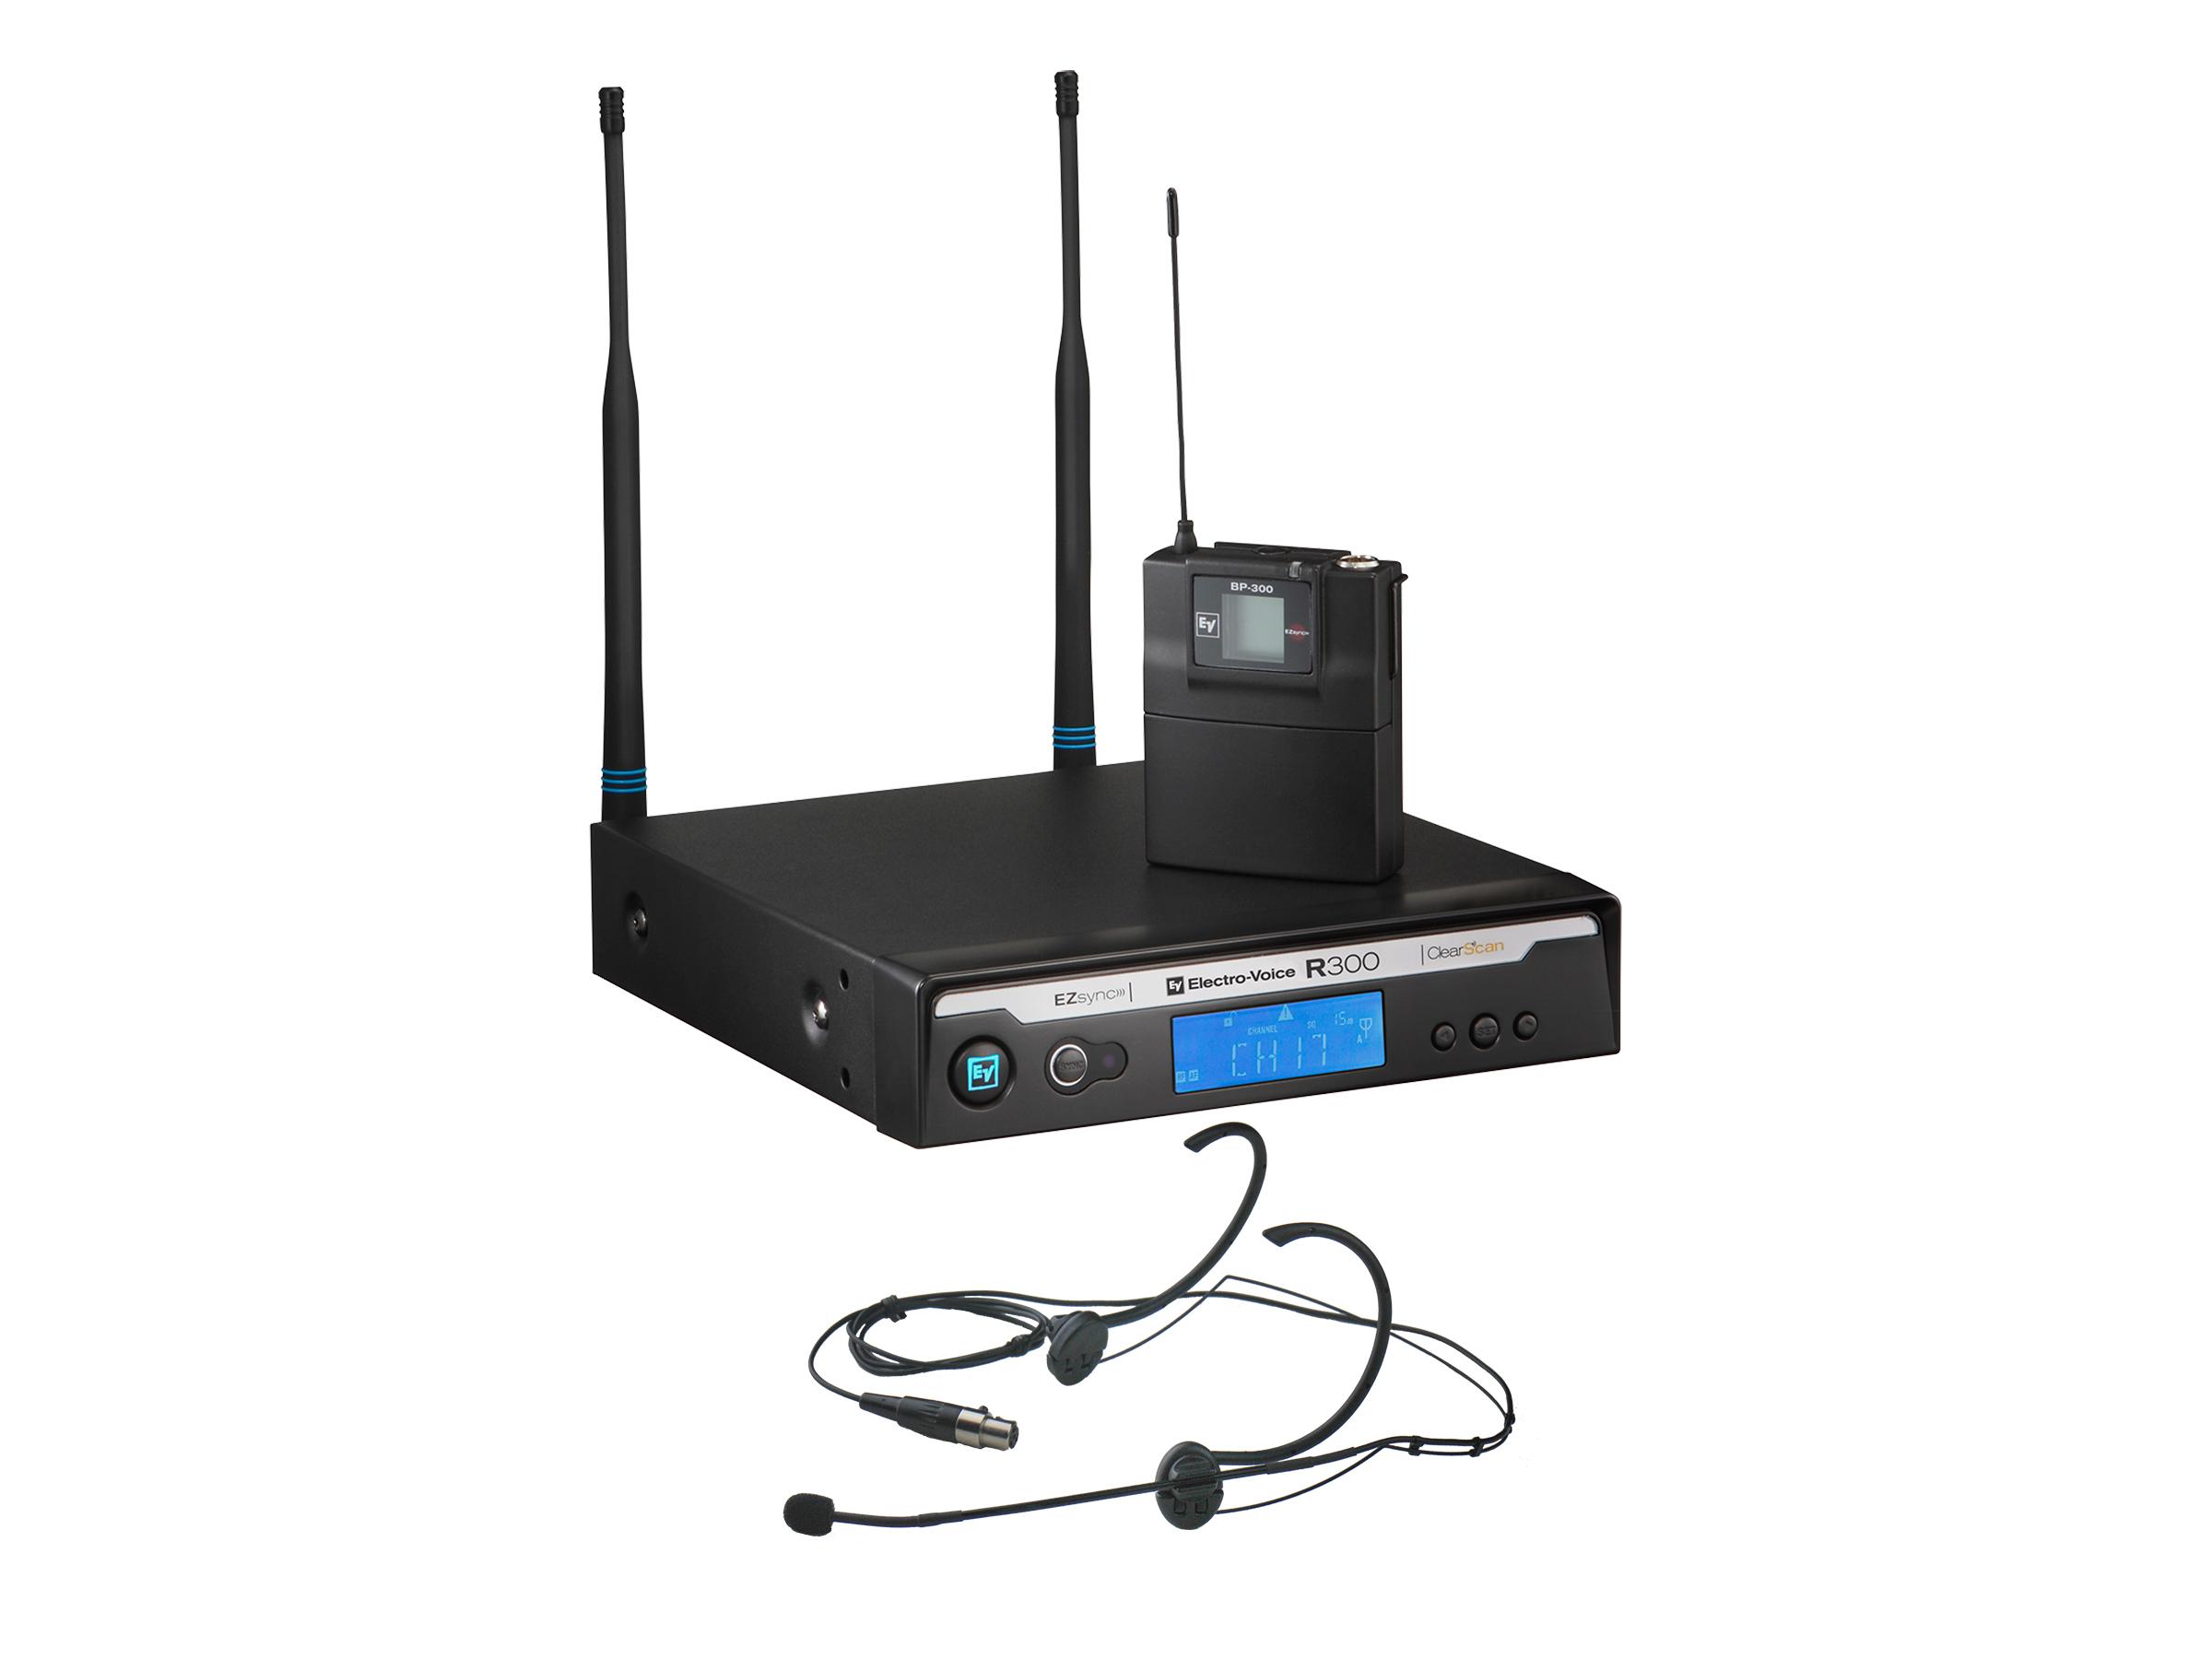 Electro-Voice R300EC R300 Series Wireless Head Worn HM-3 Microphone System C-Band/516-532 MHz